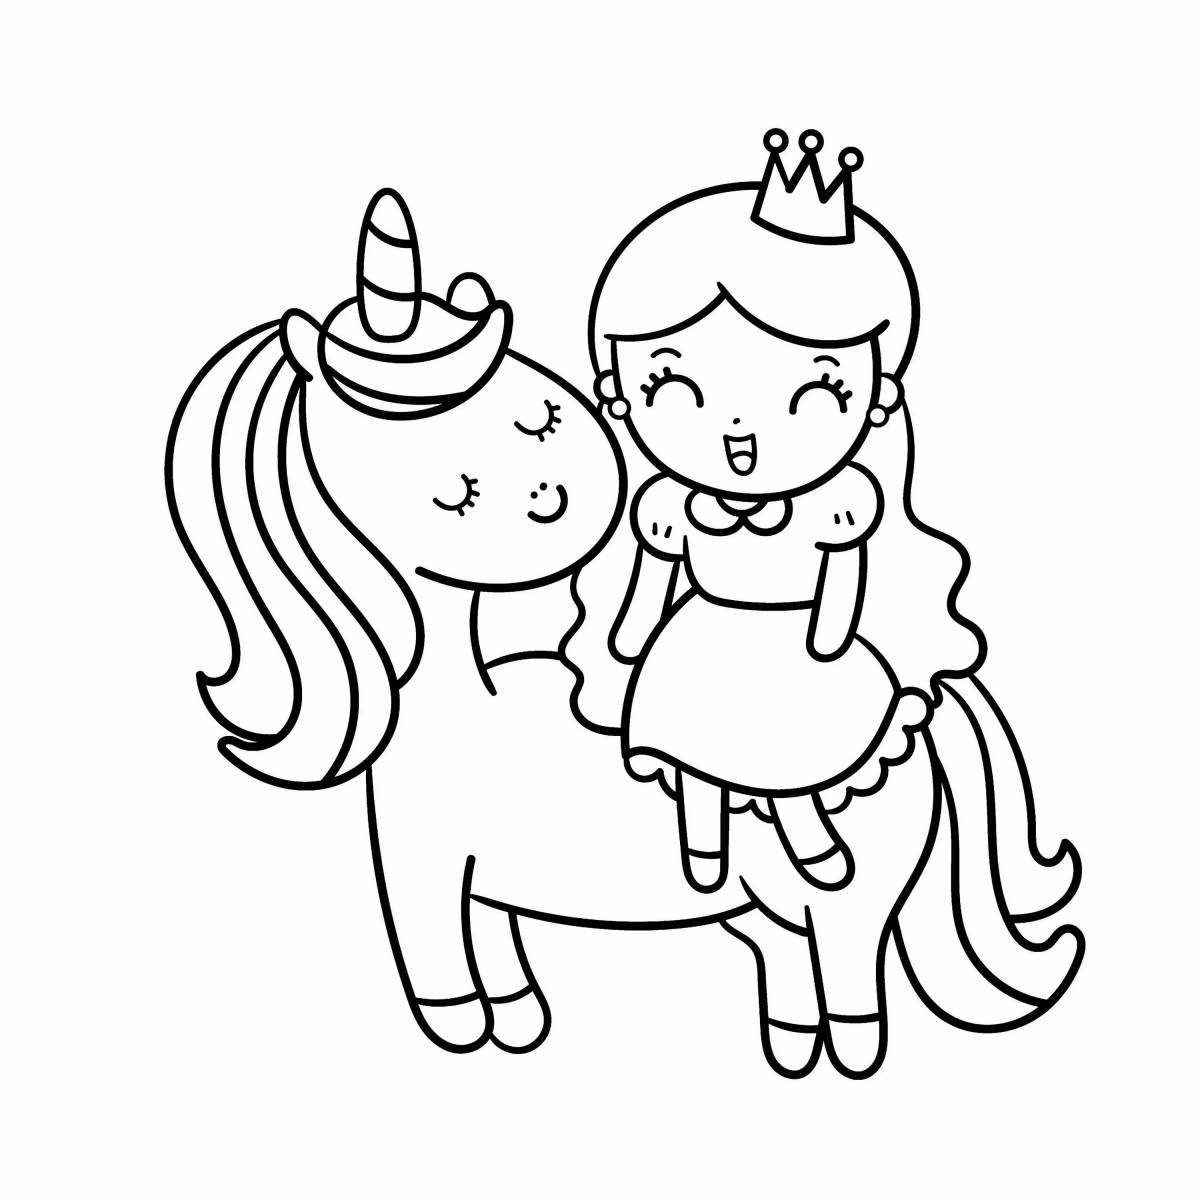 Dazzling coloring barbie with unicorn